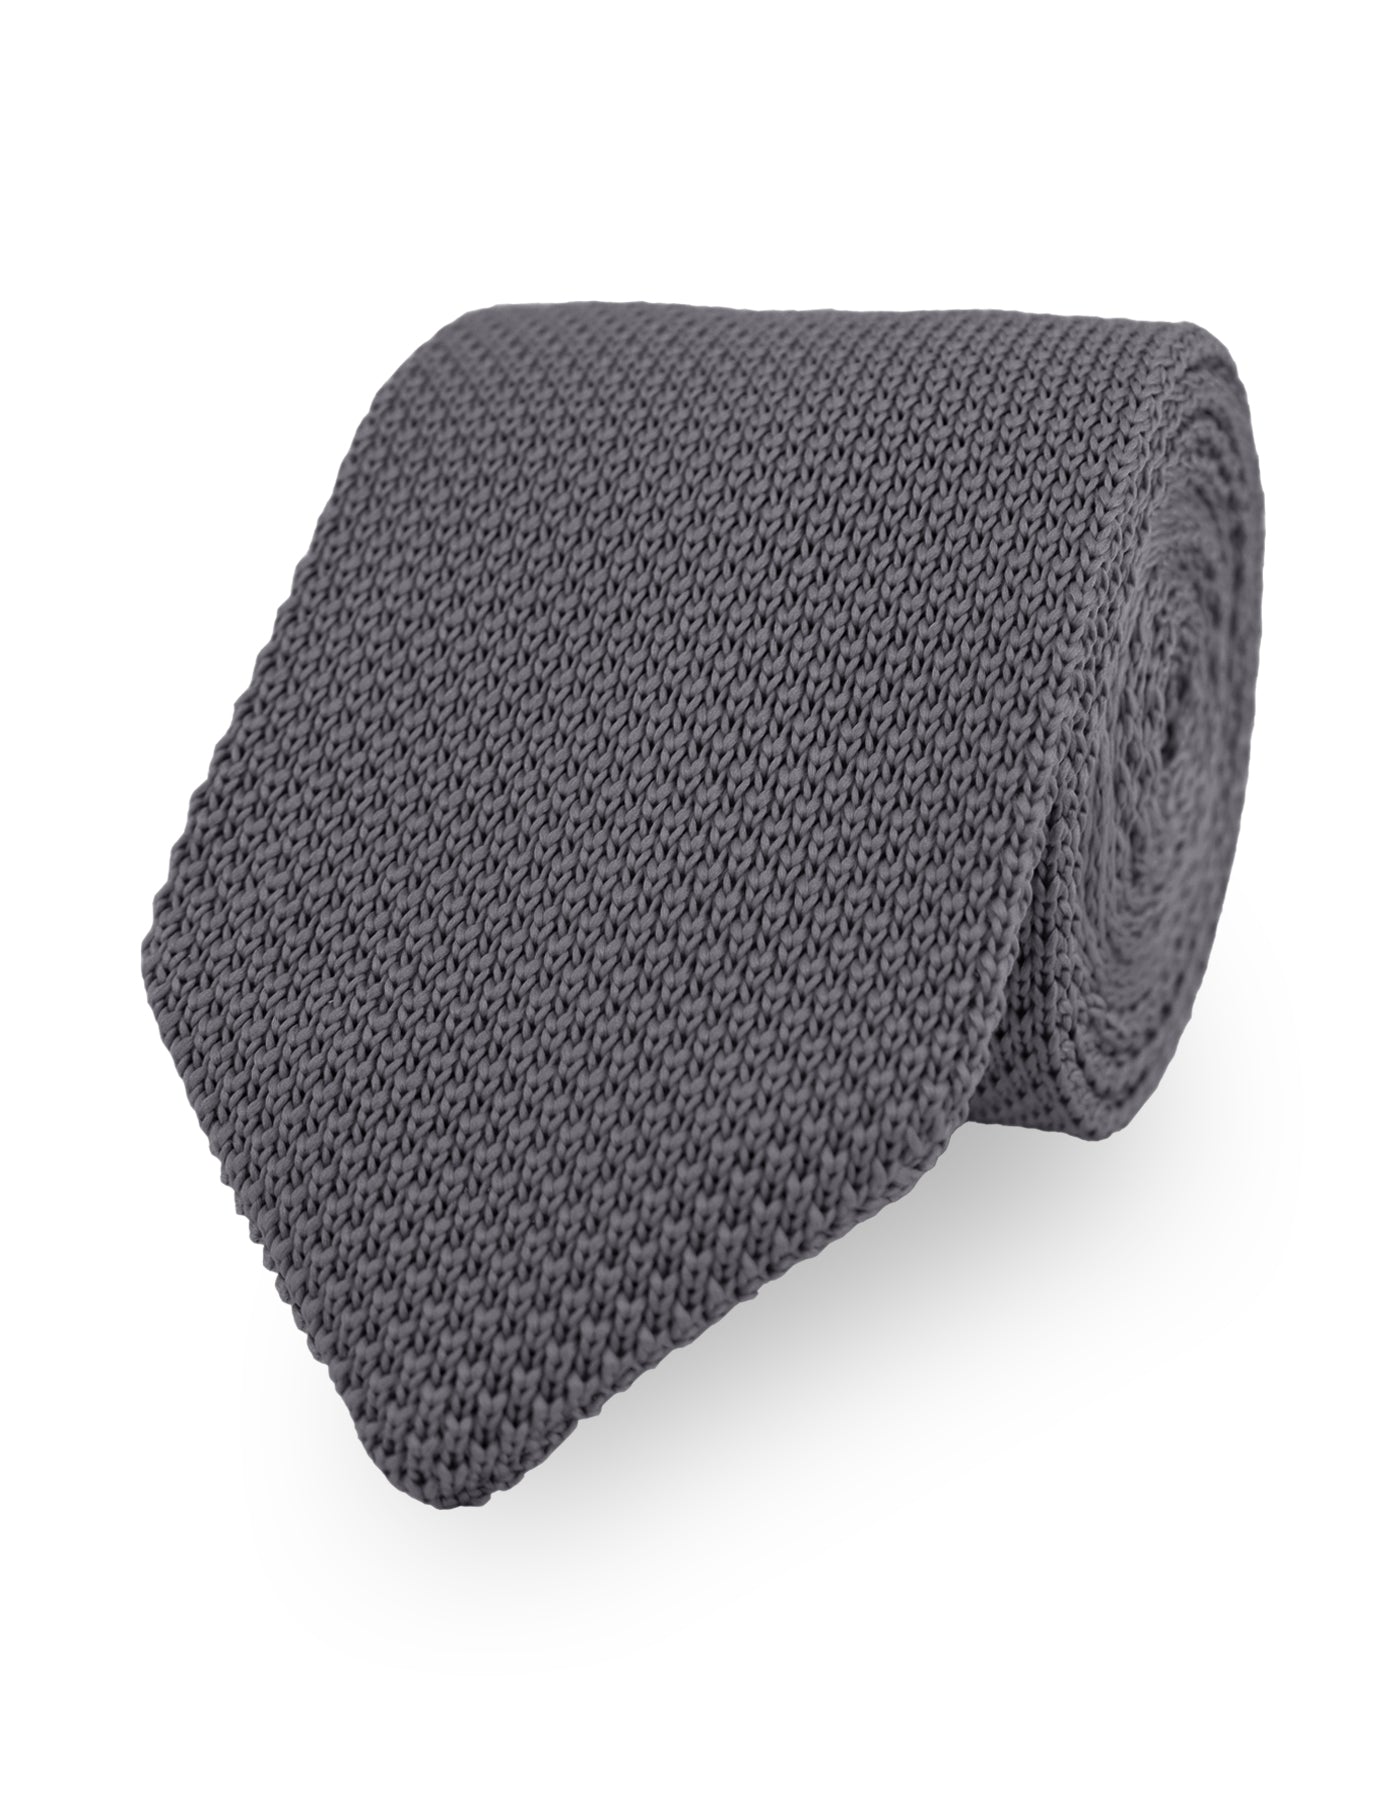 100% Polyester Square End Knitted Tie - Dark Grey